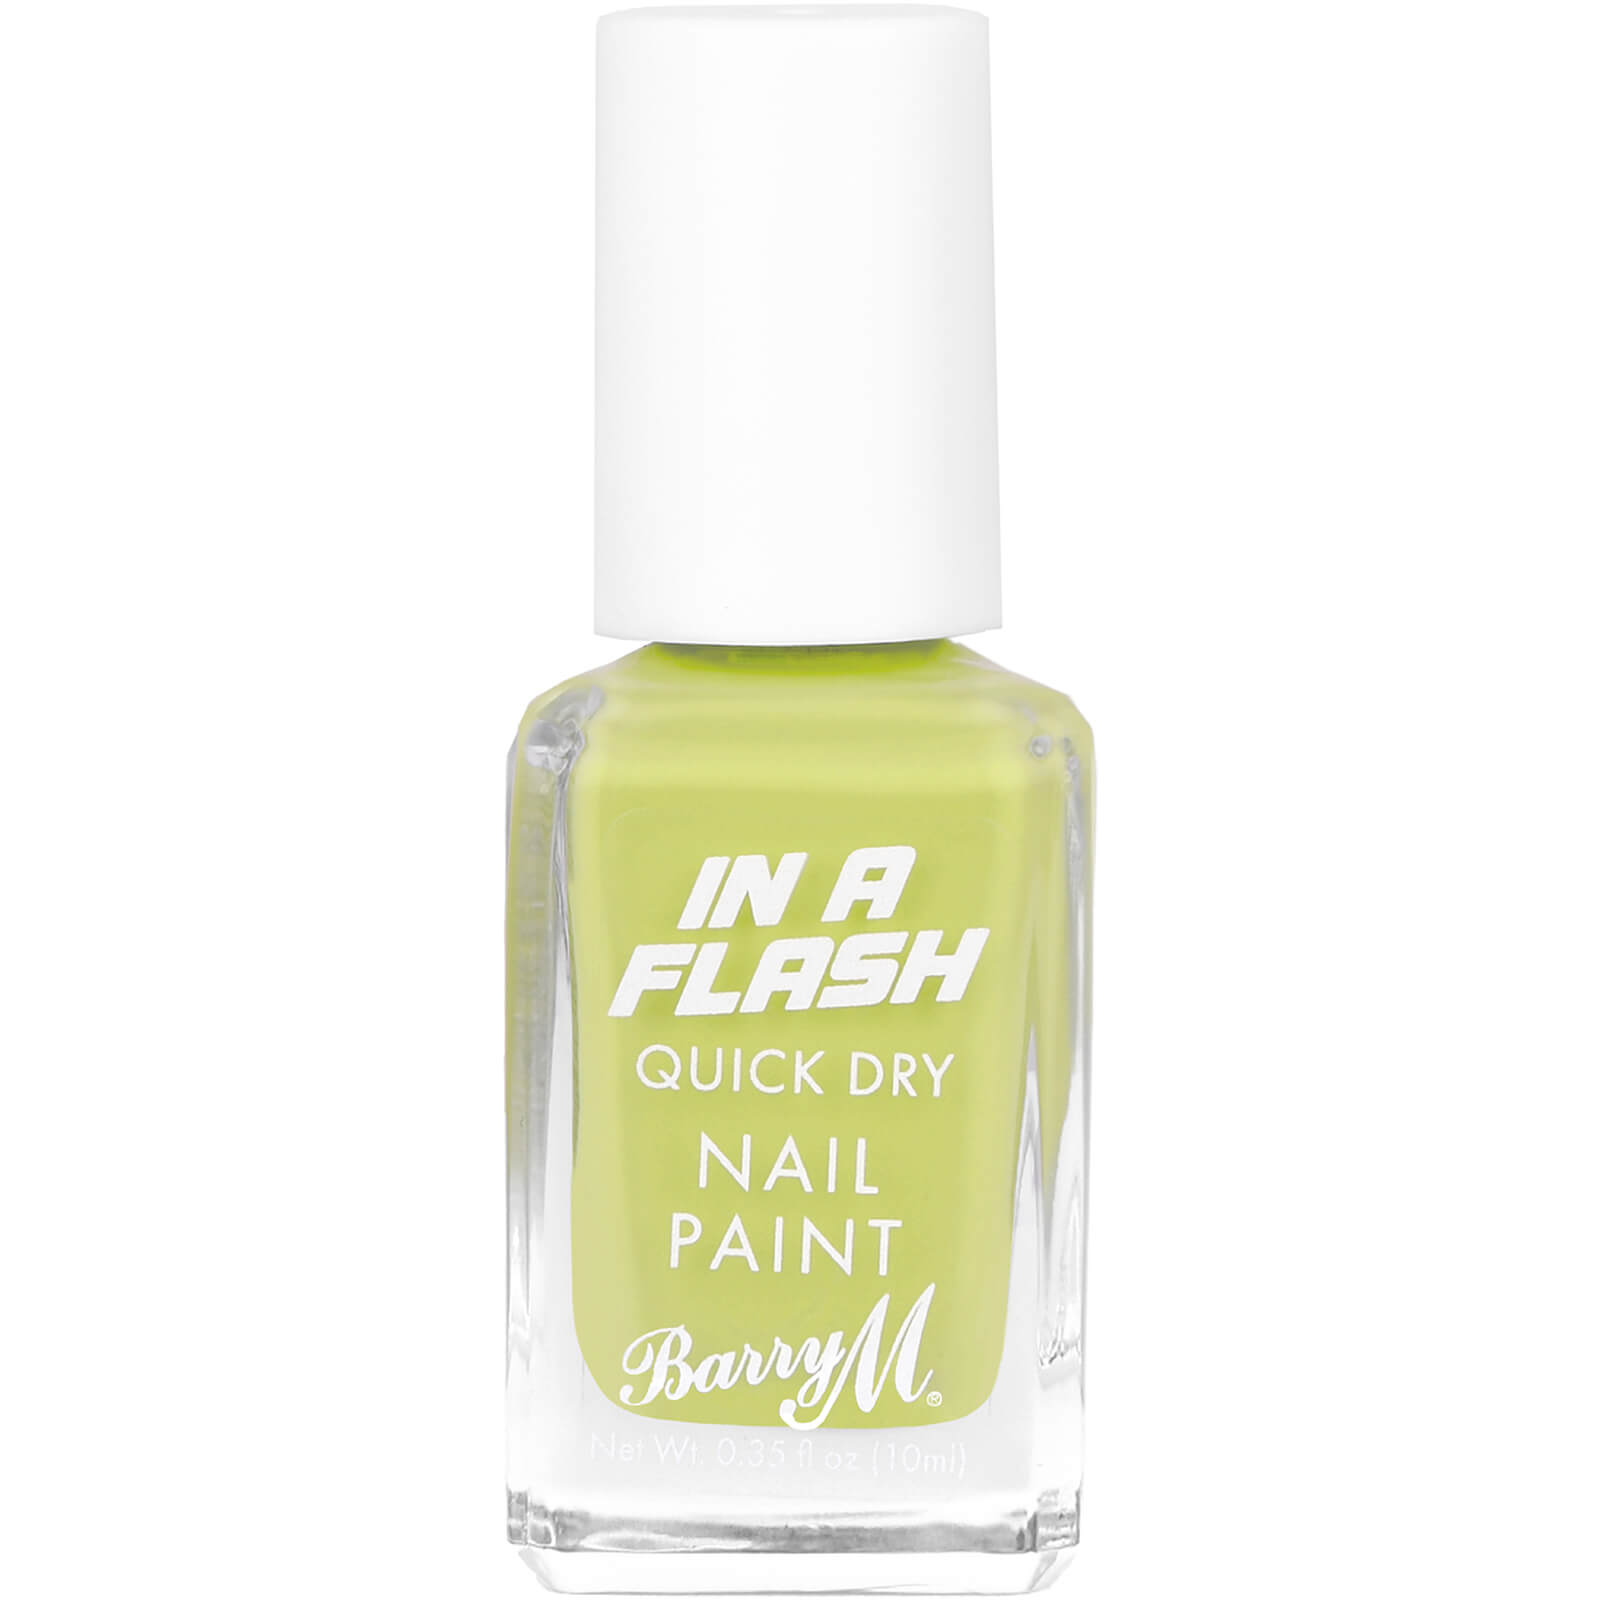 Barry M Cosmetics in a Flash Quick Dry Nail Paint 10ml (Various Shades) - Lightspeed Lime